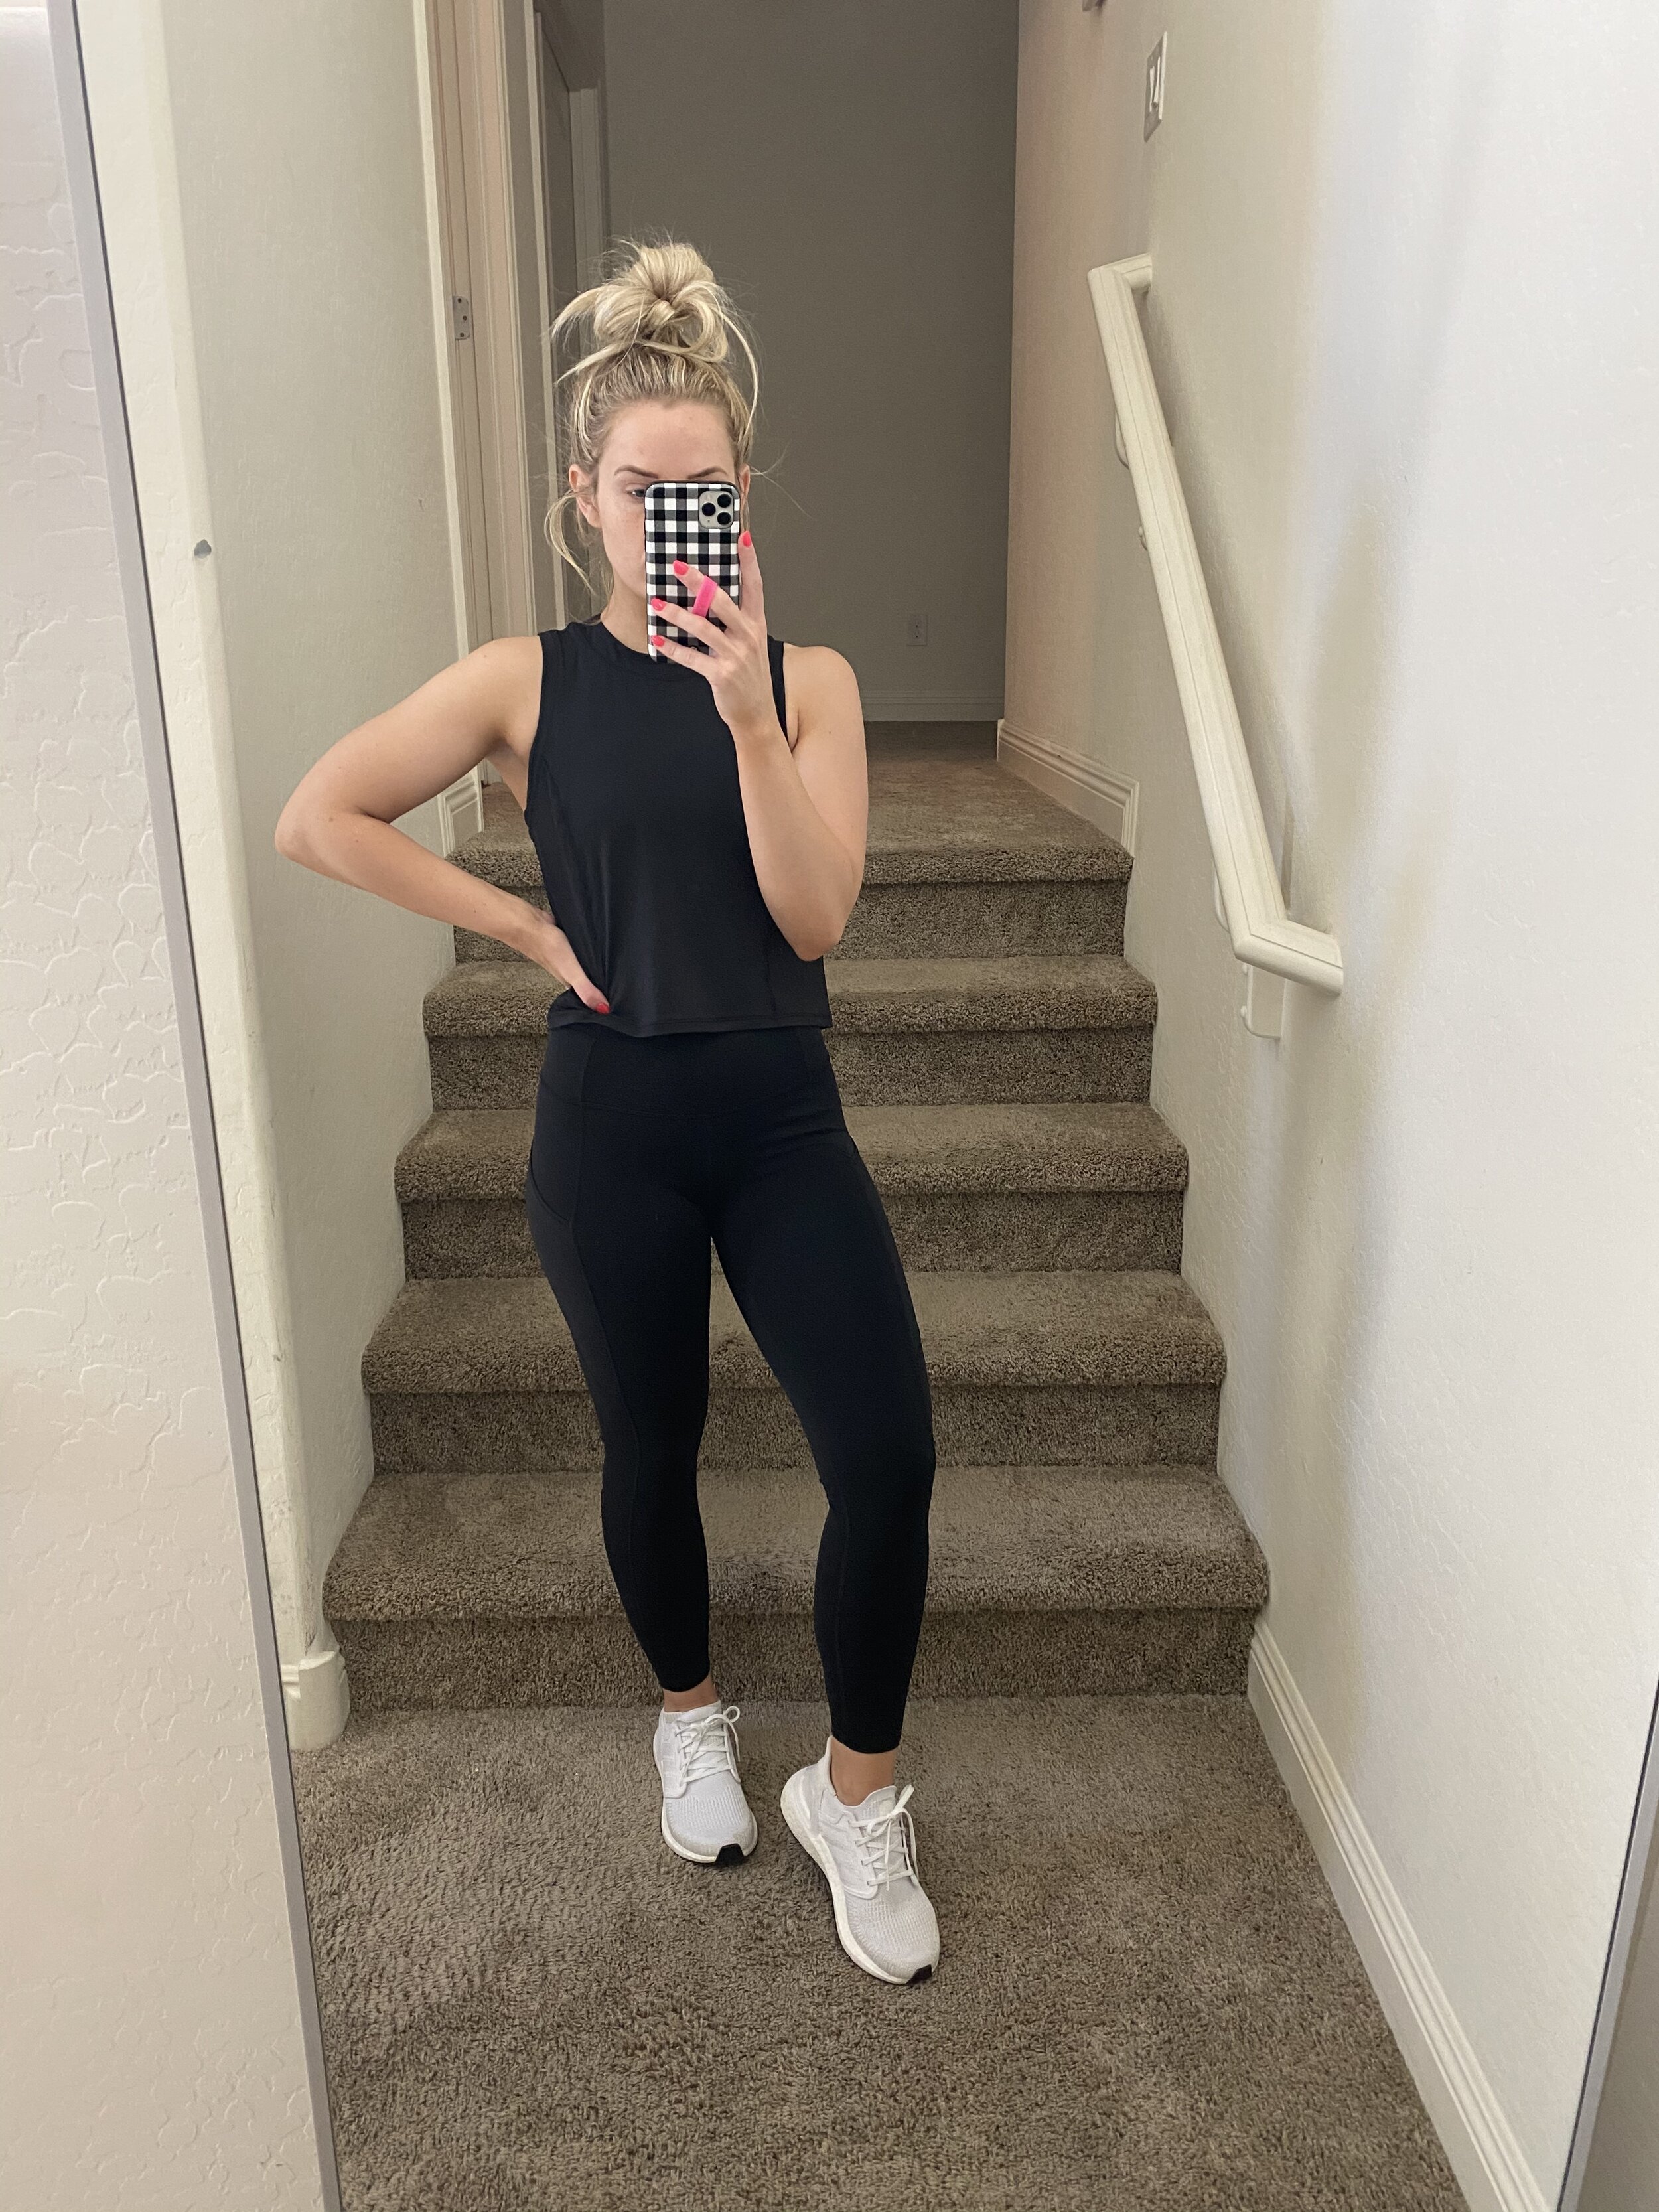 Currently in need of a dupe for the Lululemon flared align leggings/yo